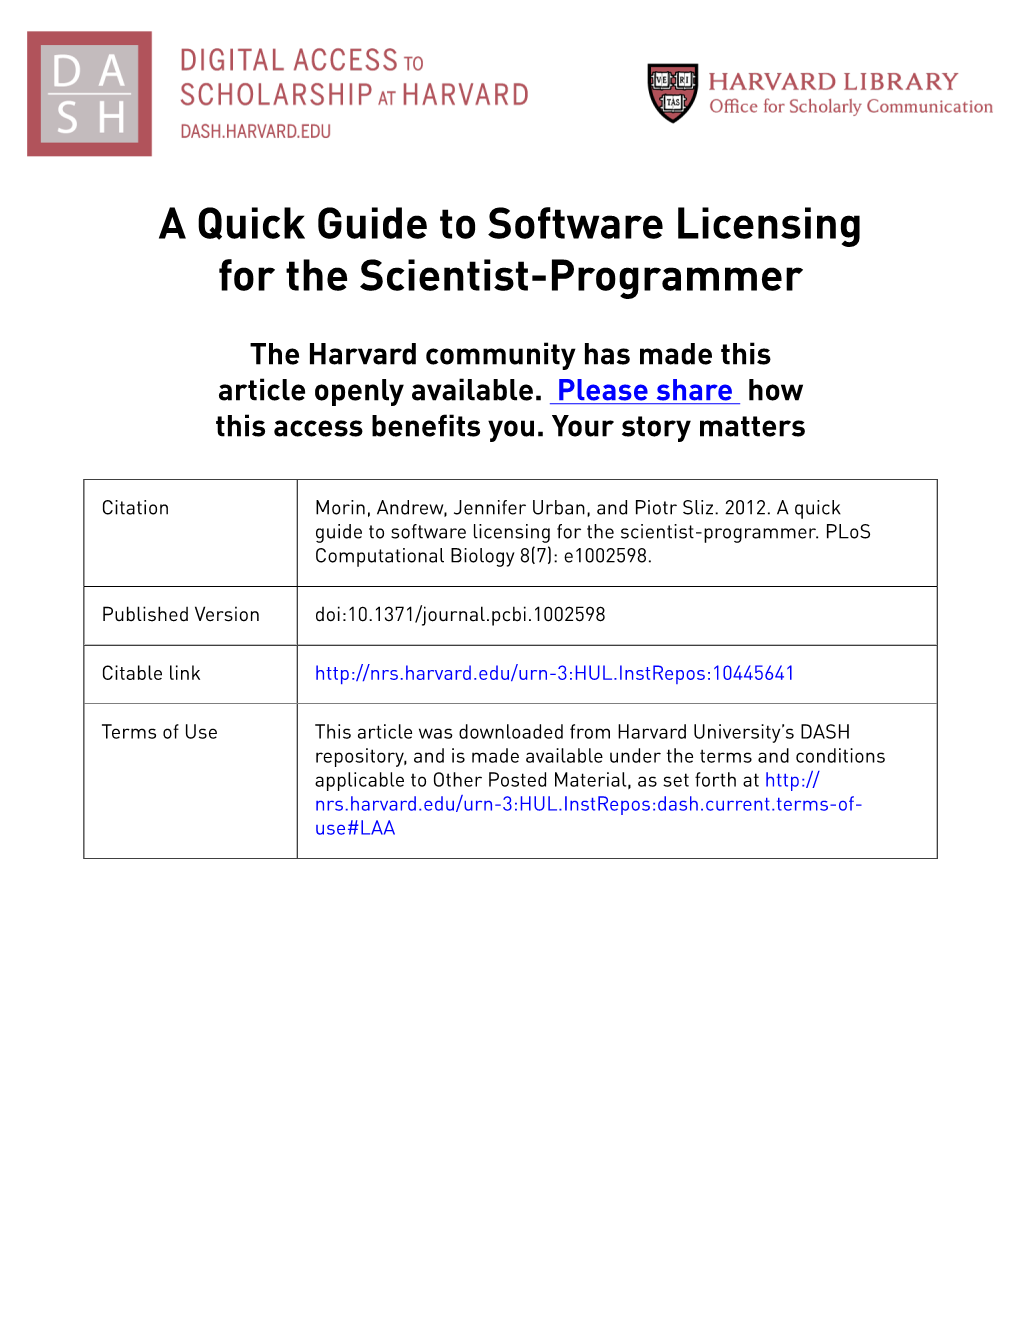 A Quick Guide to Software Licensing for the Scientist-Programmer